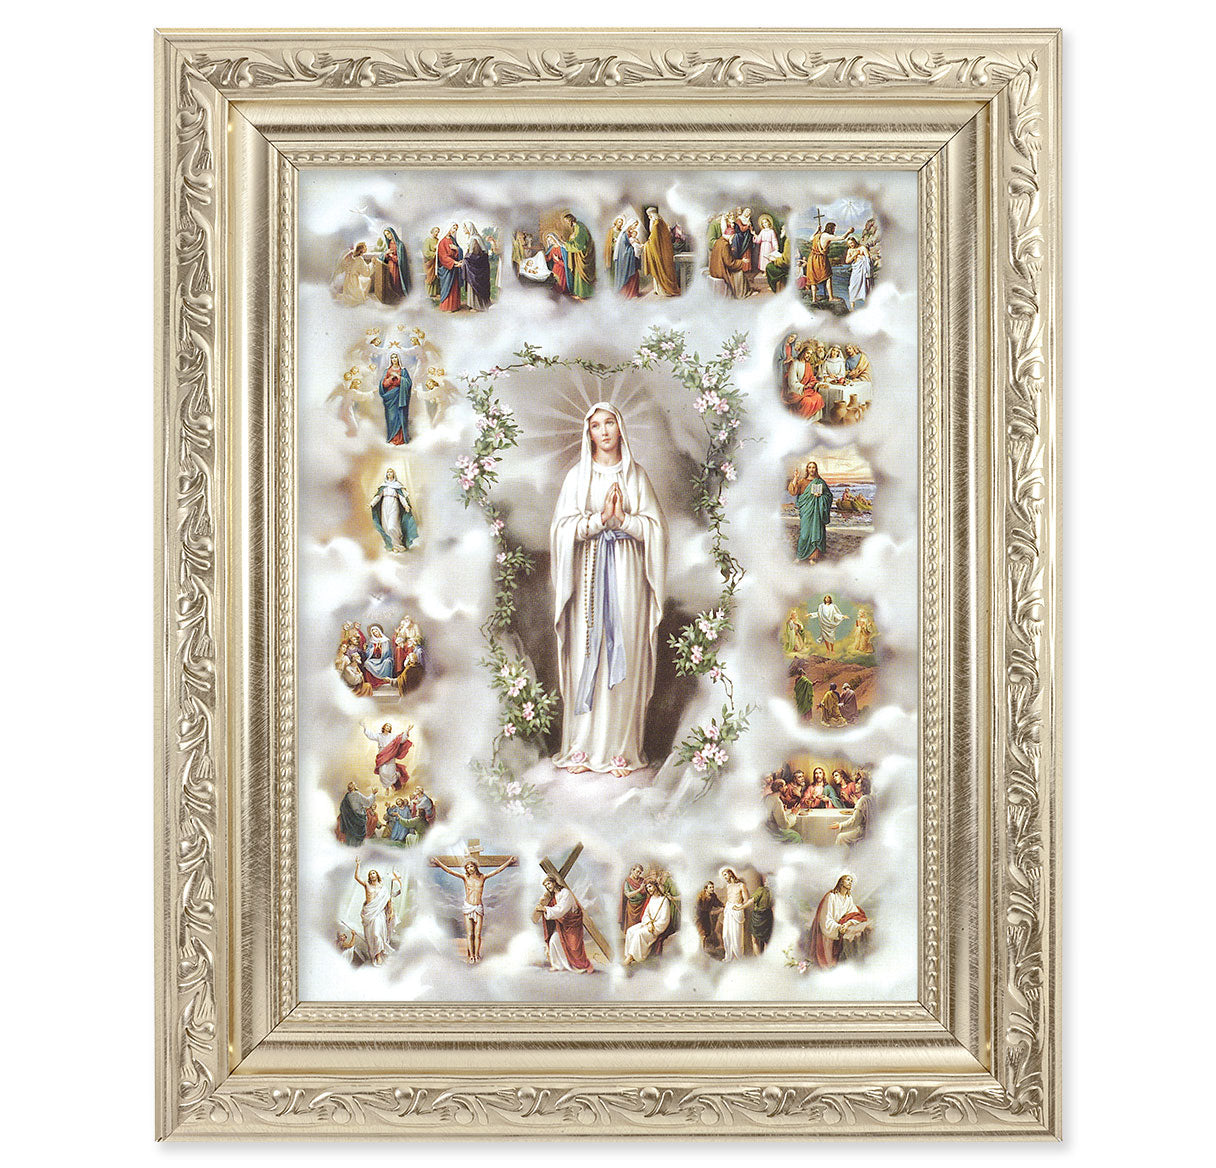 20 Mysteries of the Rosary Silver Framed Art